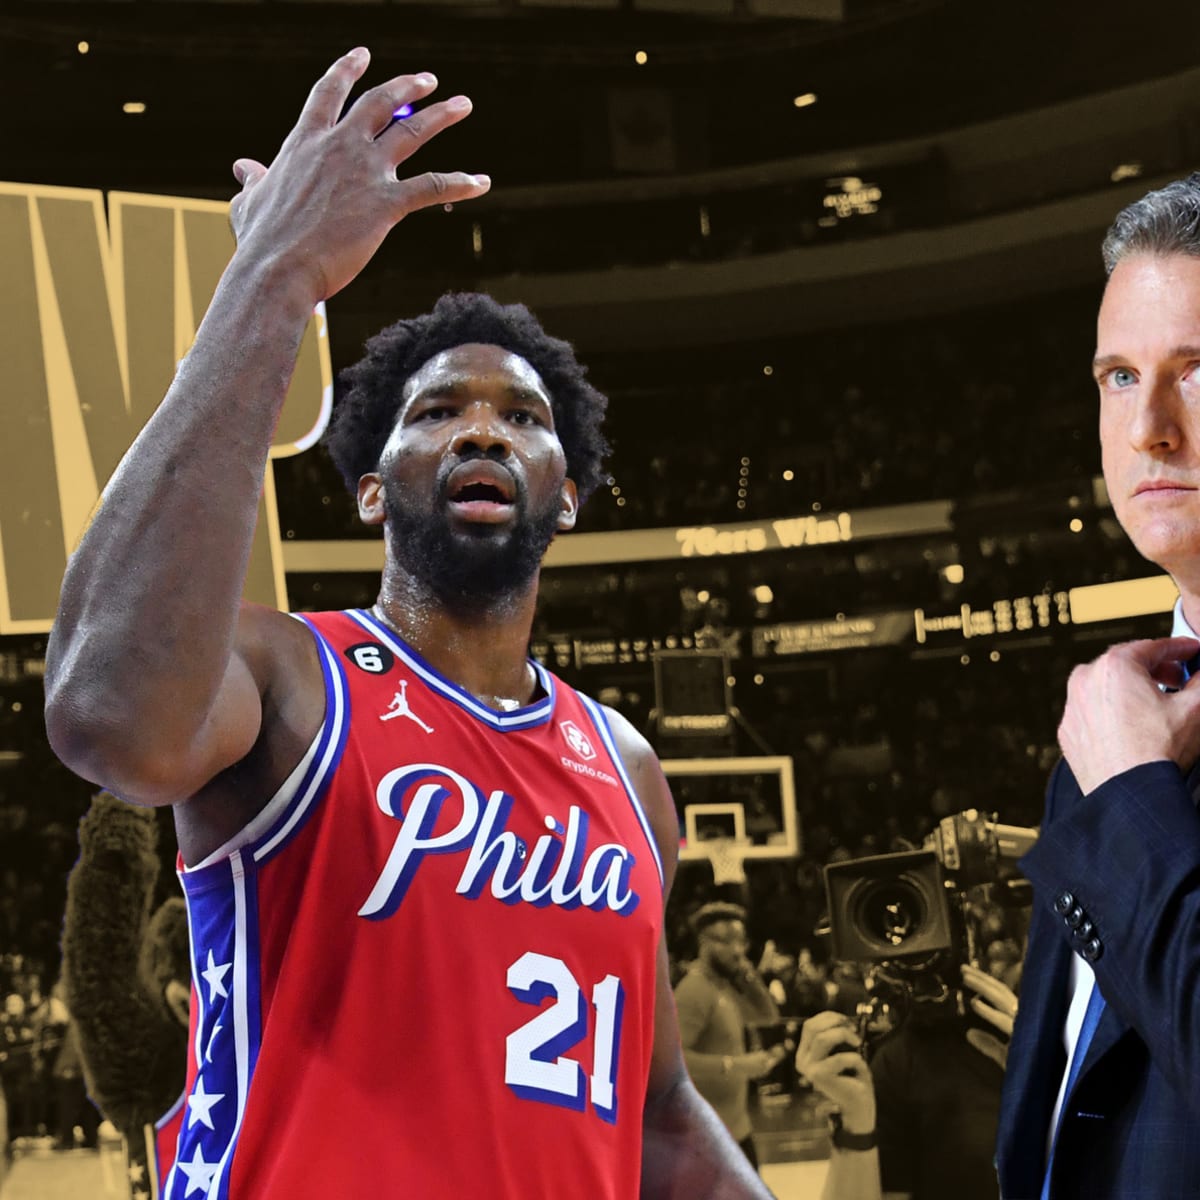 How Many Centers Are Better Than Joel Embiid Right Now? - The Ringer